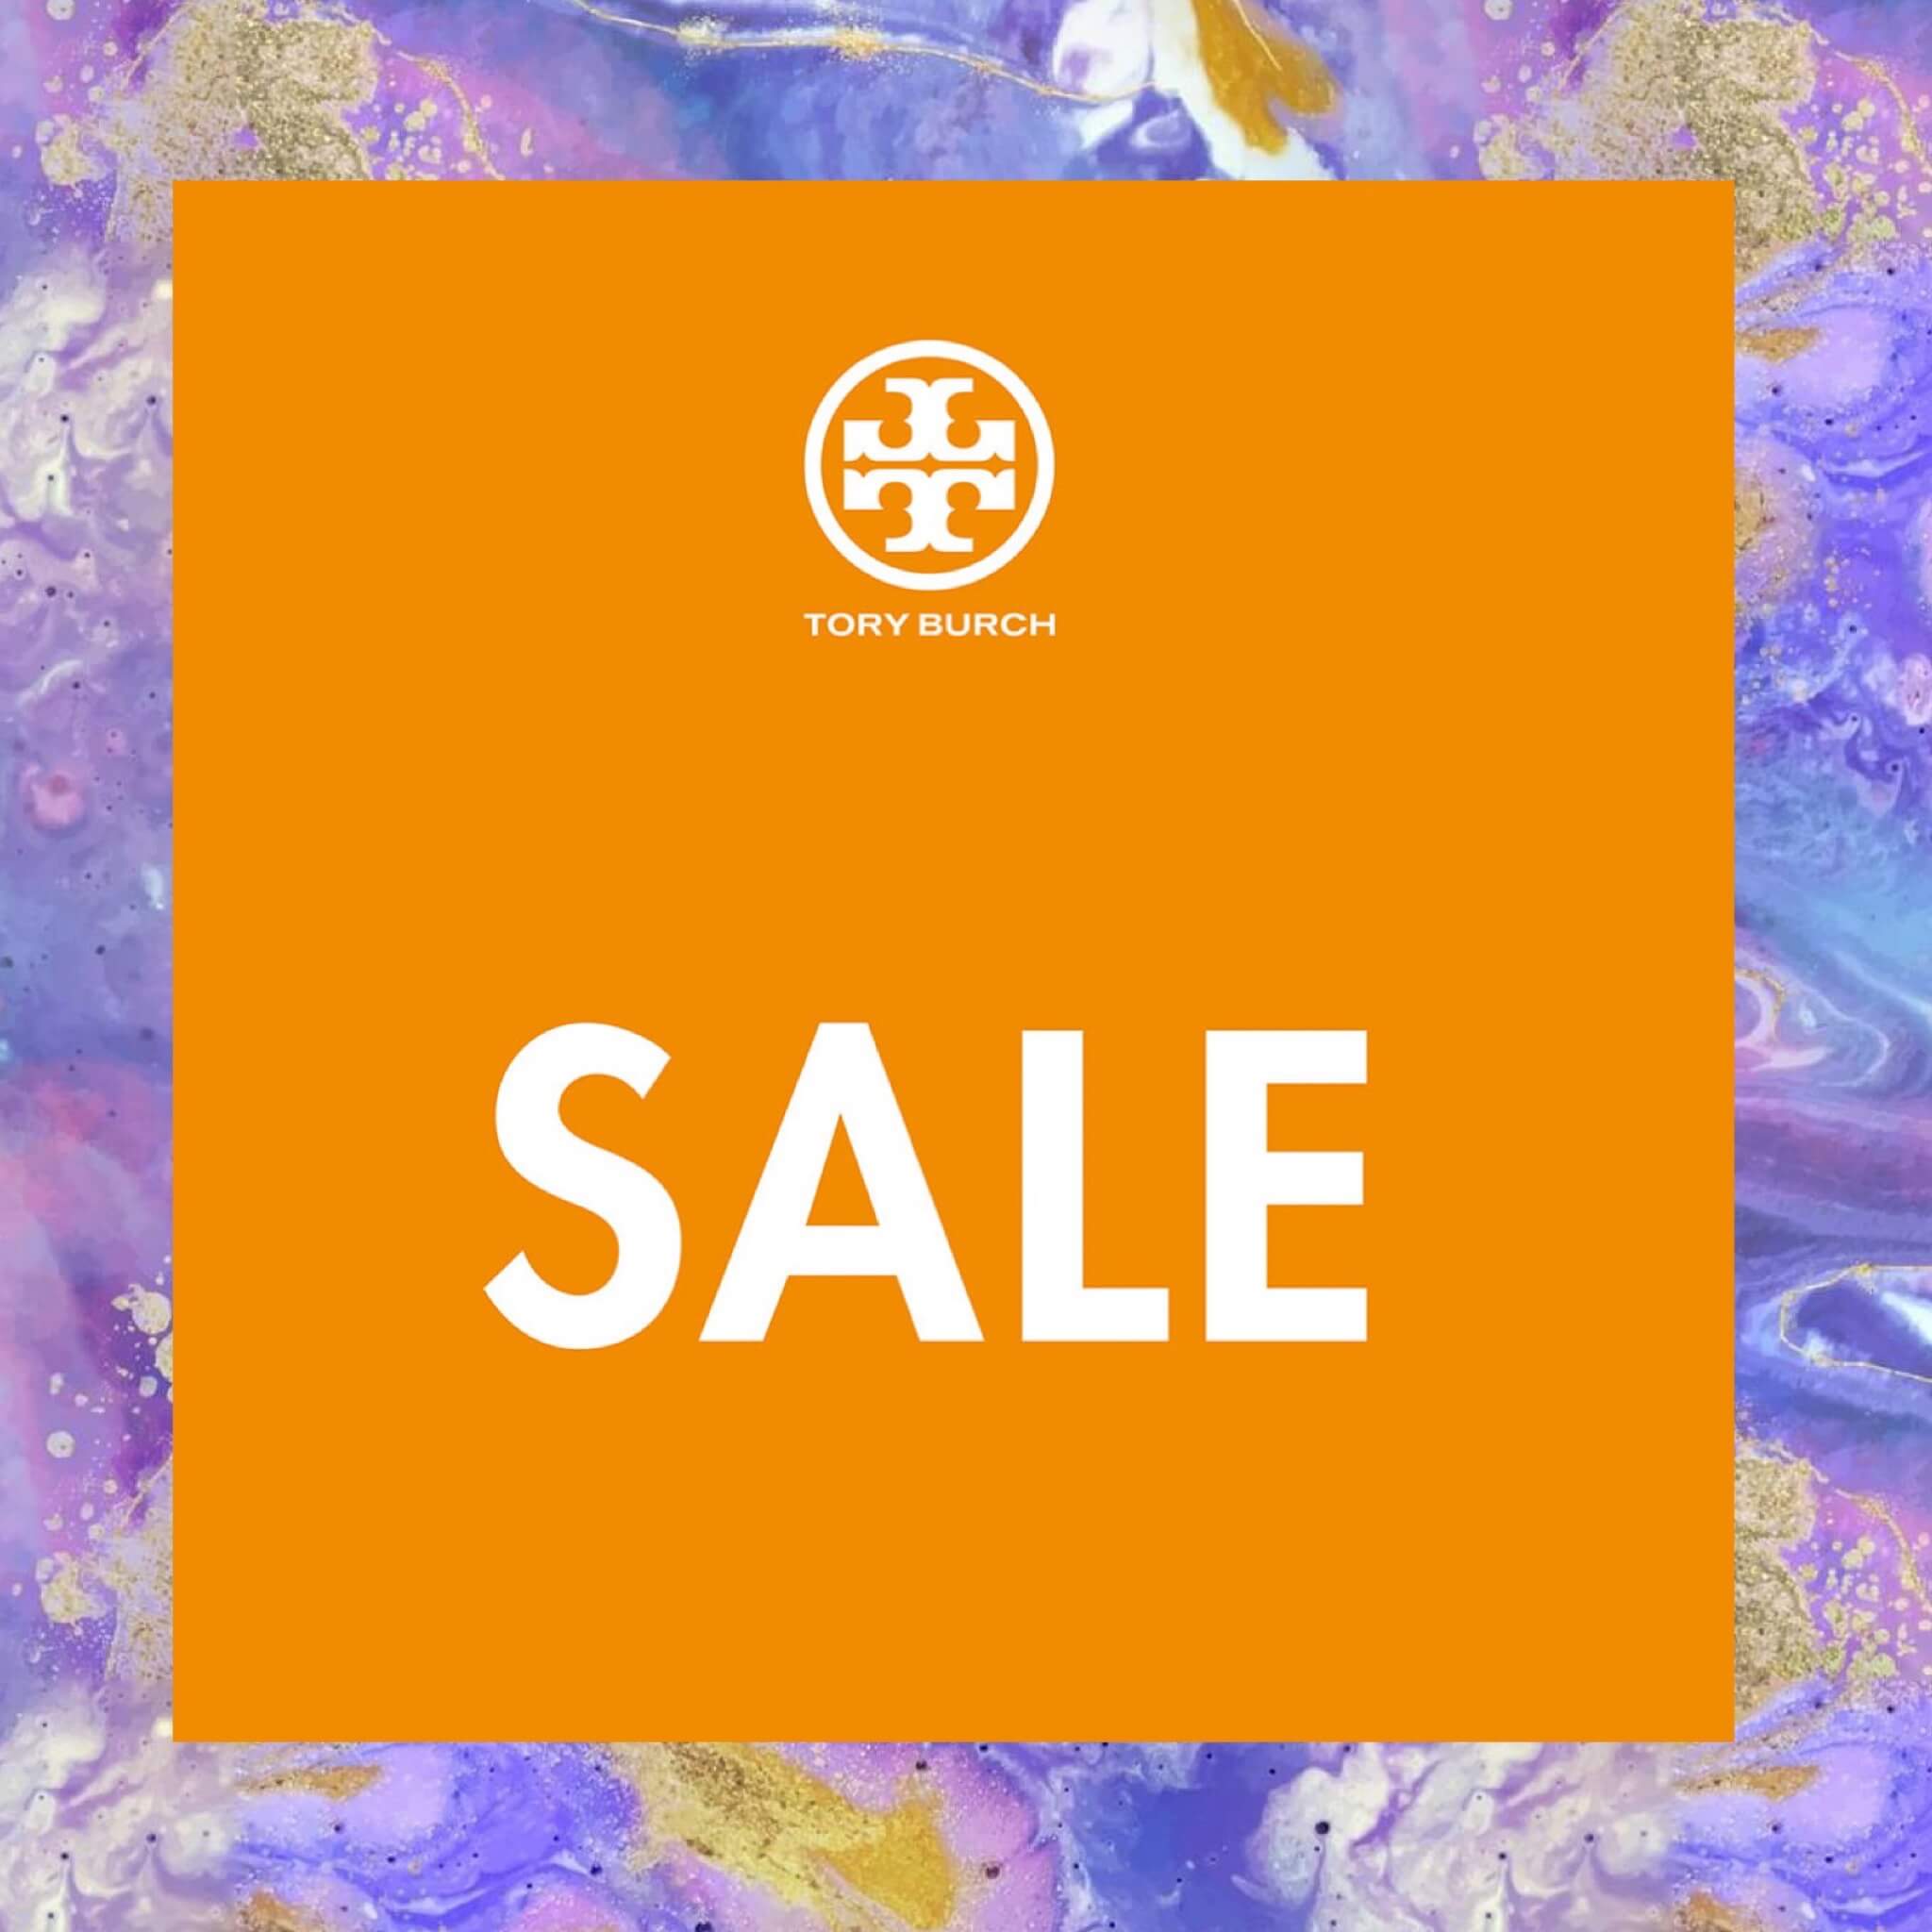 Tory Burch Fall Event Starts Now | Save Up To 30% Off! - The Double Take  Girls